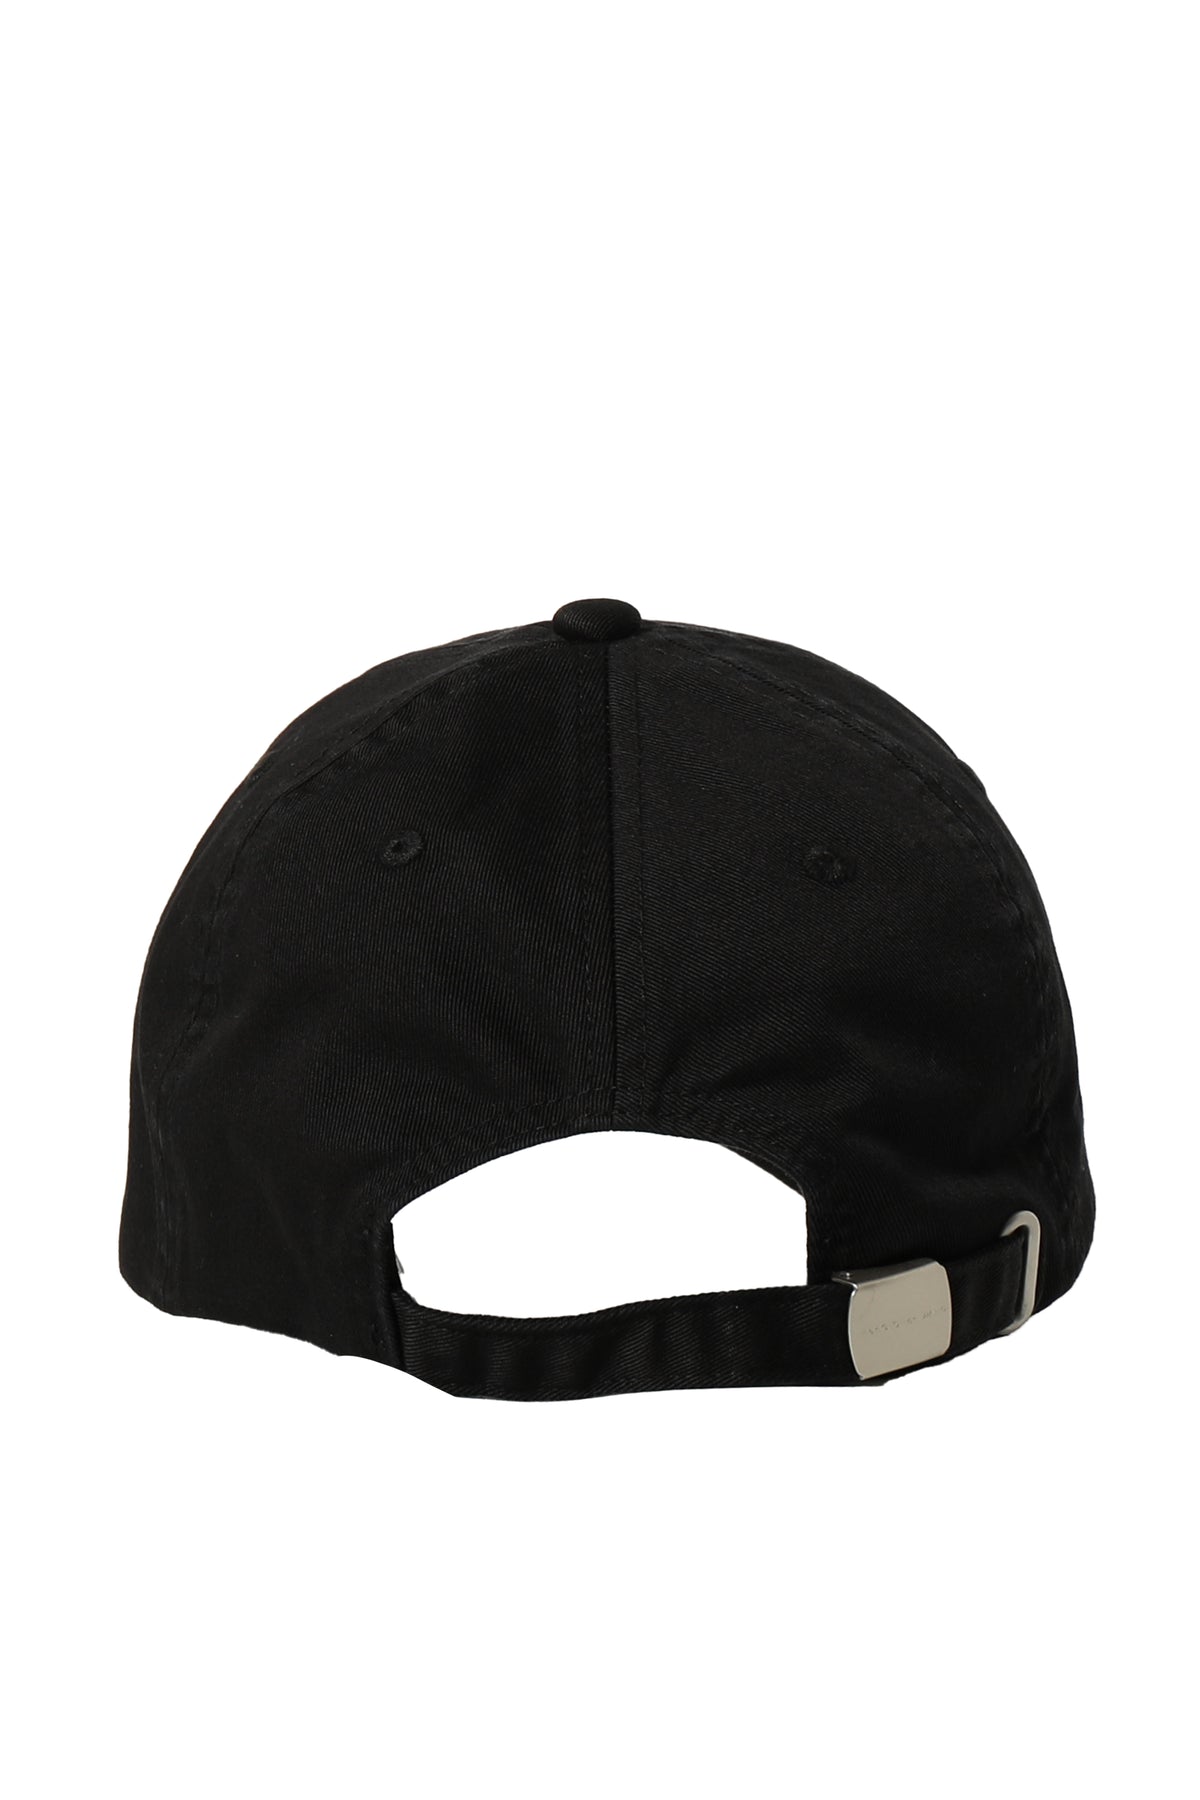 BLACK AND GREY PHOENIX EMBROIDERED CANVAS CAP / BLK